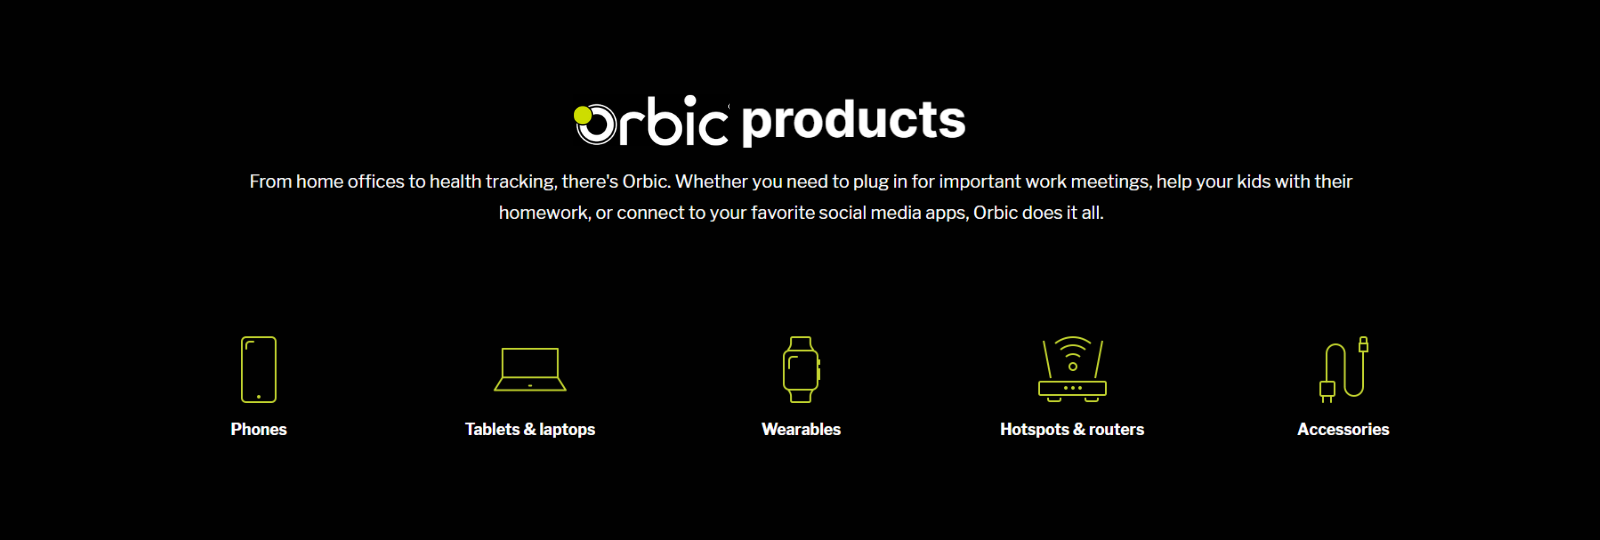 Orbic Products